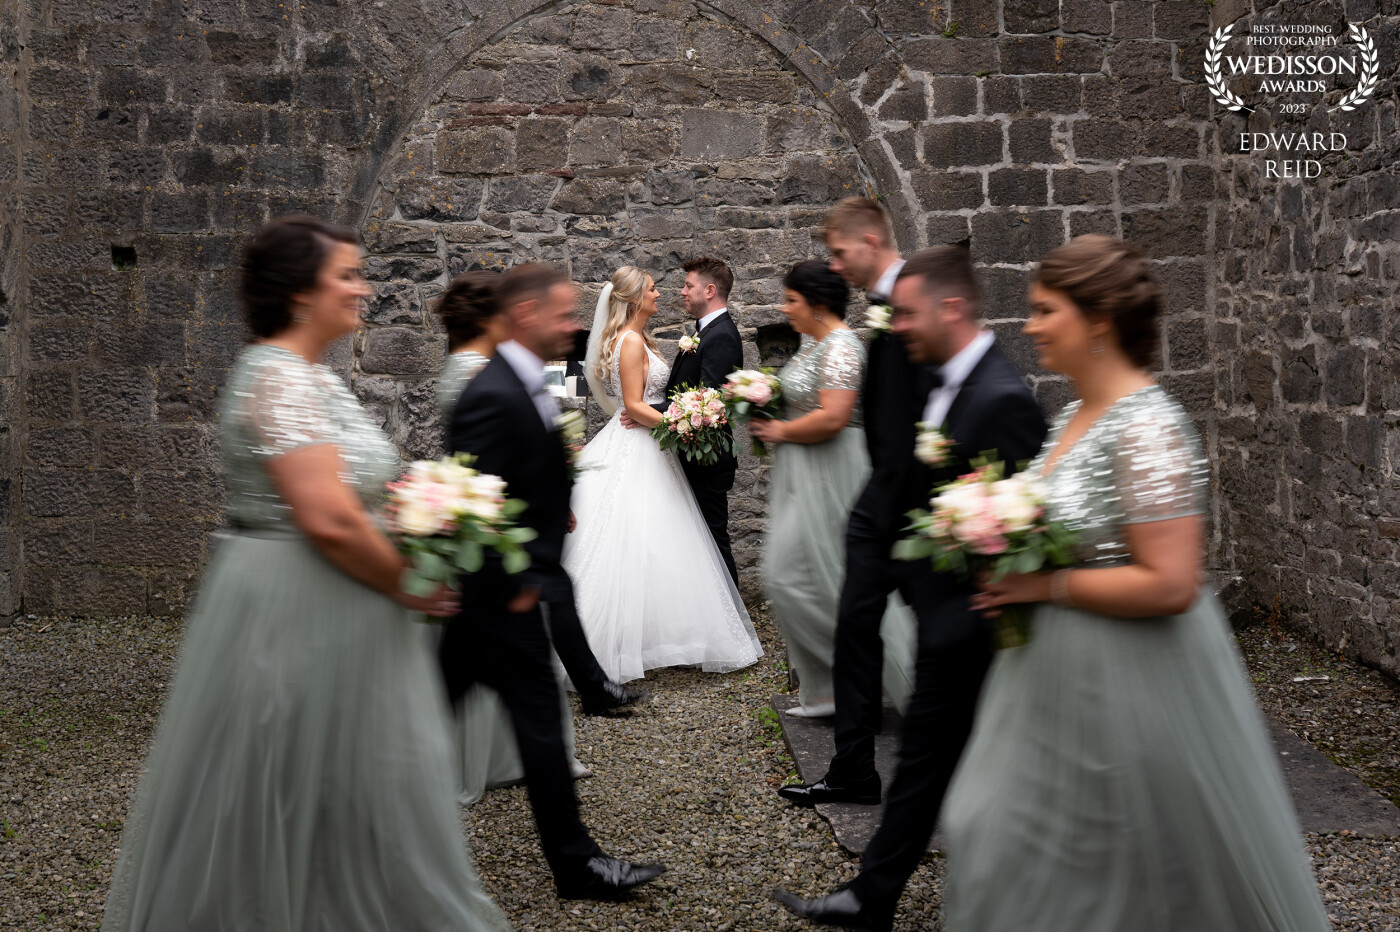 I love involving the bridal party in a bit of motion.  Stuff like this usually has bridal parties left scratching their heads in wonder of what it will look like but I love how the motion draws more attention to my wonderful couple.